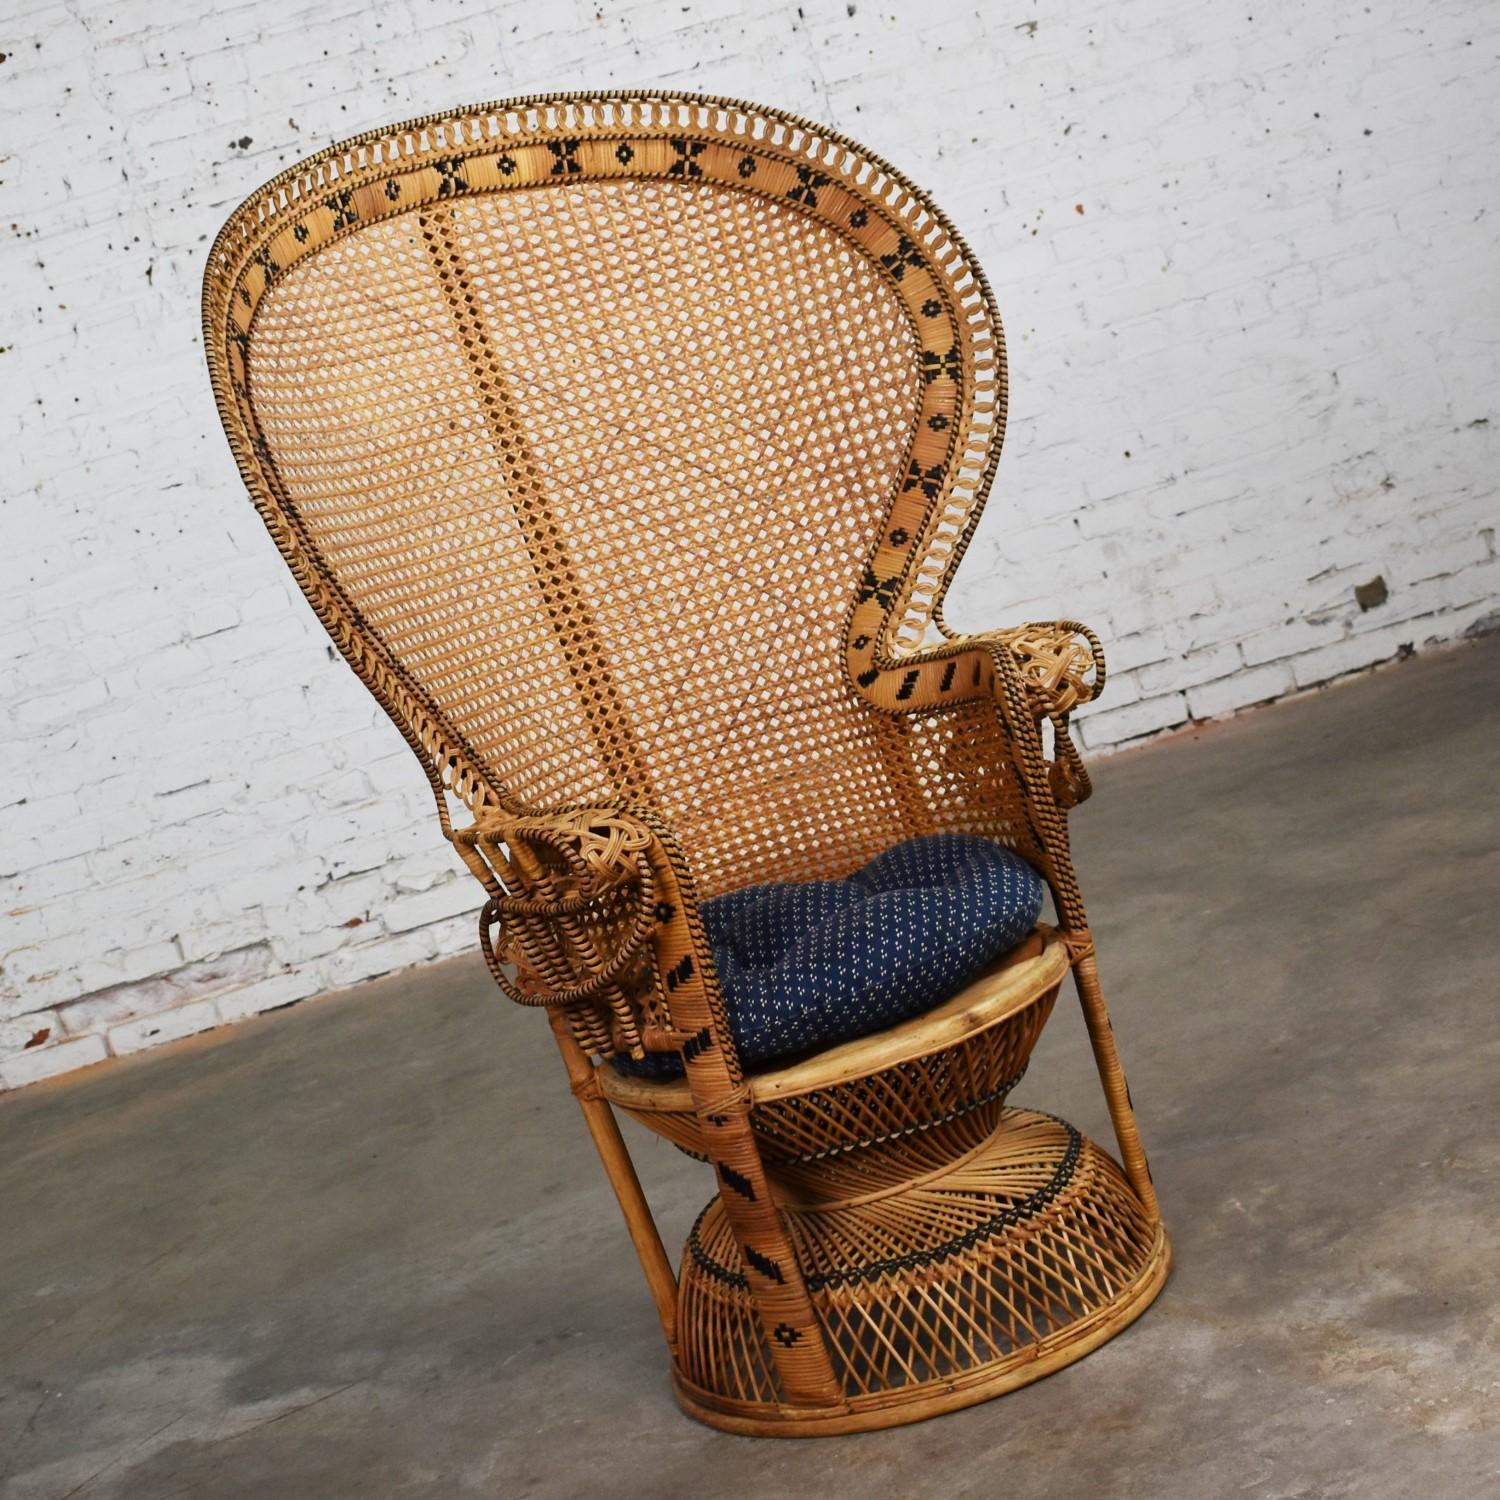 Awesome vintage Bohemian or Hollywood Regency wicker rattan peacock fan back chair. It is in wonderful vintage condition with no outstanding flaws we have detected. It also has a navy-blue small print design seat cushion which, although in good